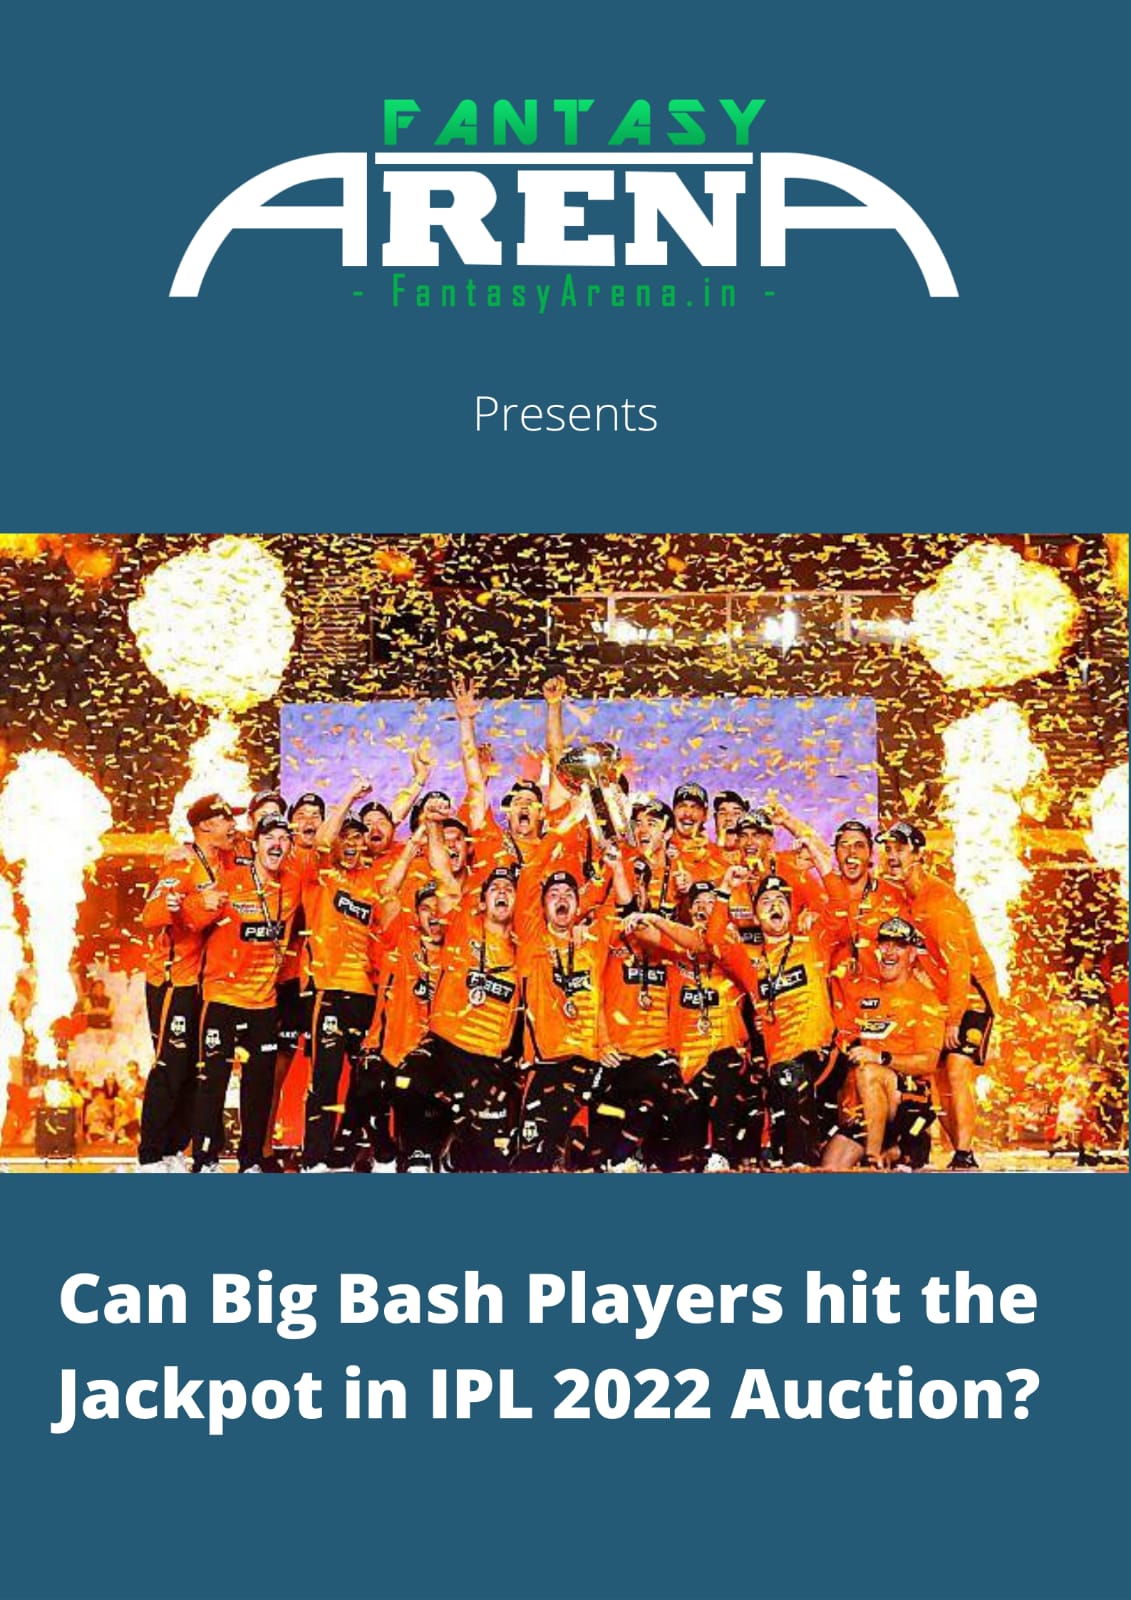 Can Big Bash Players hit the Jackpot in IPL Auctions?